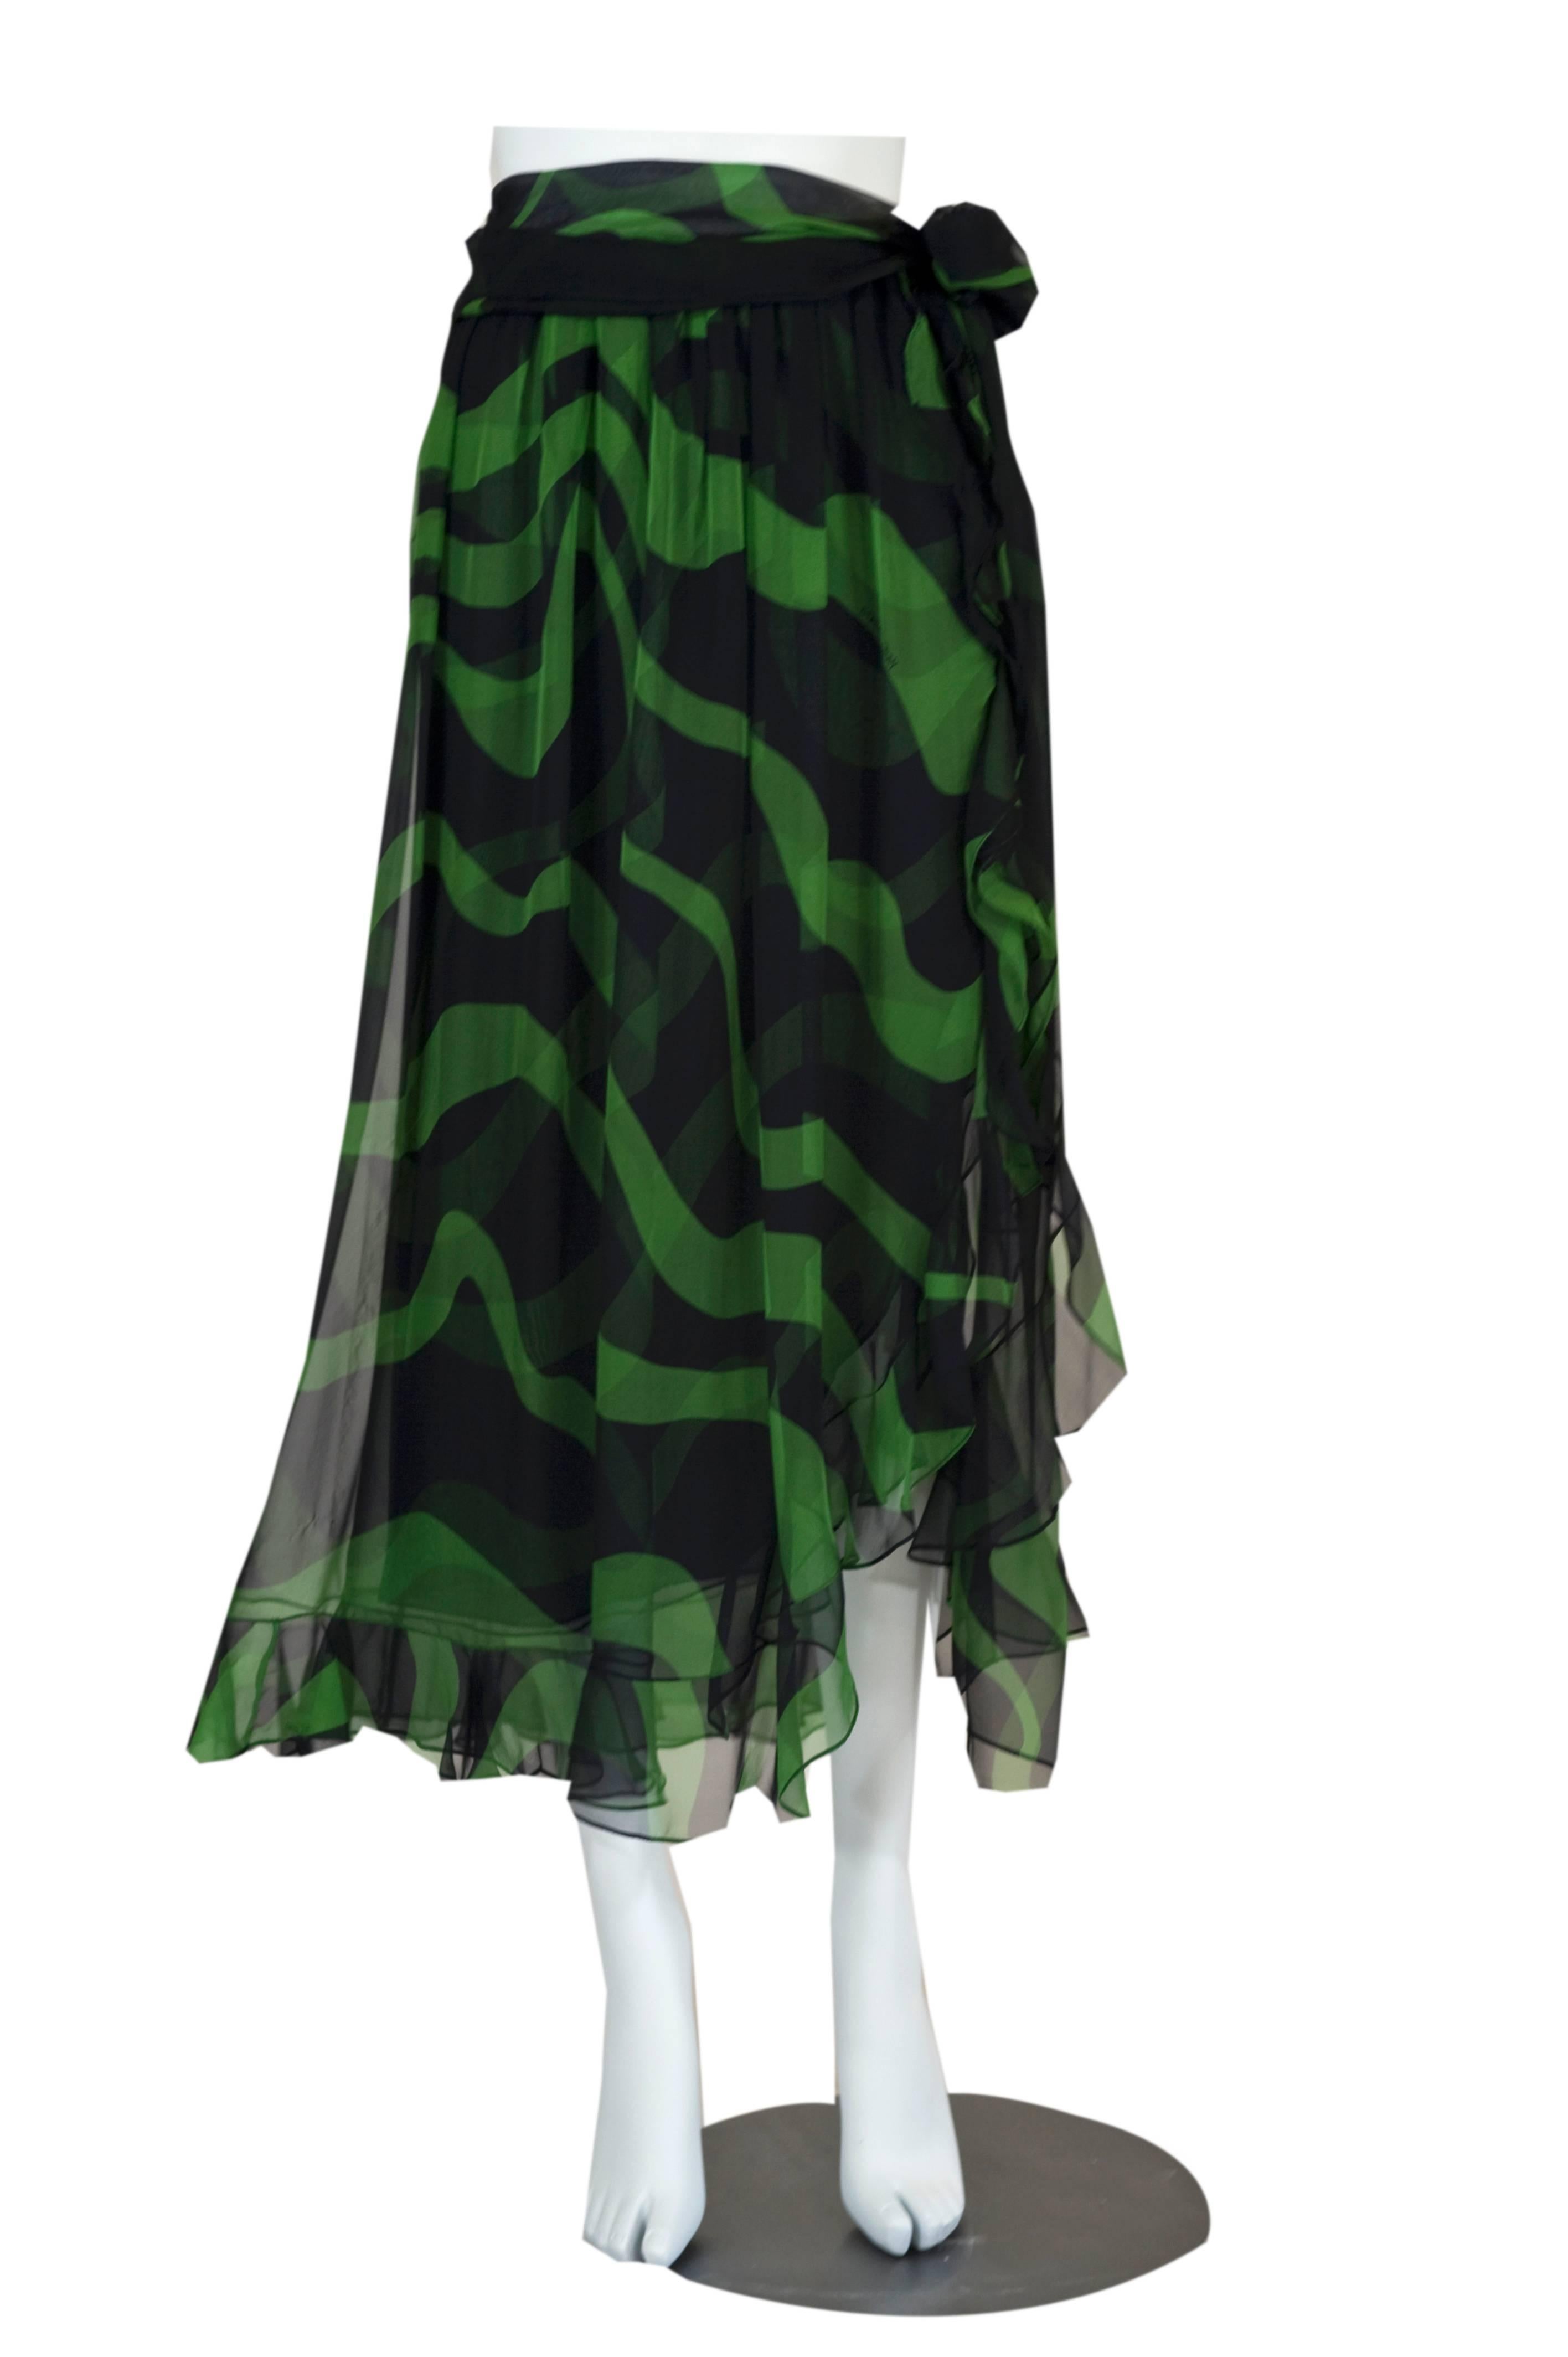 This is a fabulous  YSL silk  flamenco skirt. Made of fine lightweight airy silk chiffon that feels incredible against the body. I love the midnight black and green abstract swirl pattern. The skirt is finished in a ruffled edge that cascades down